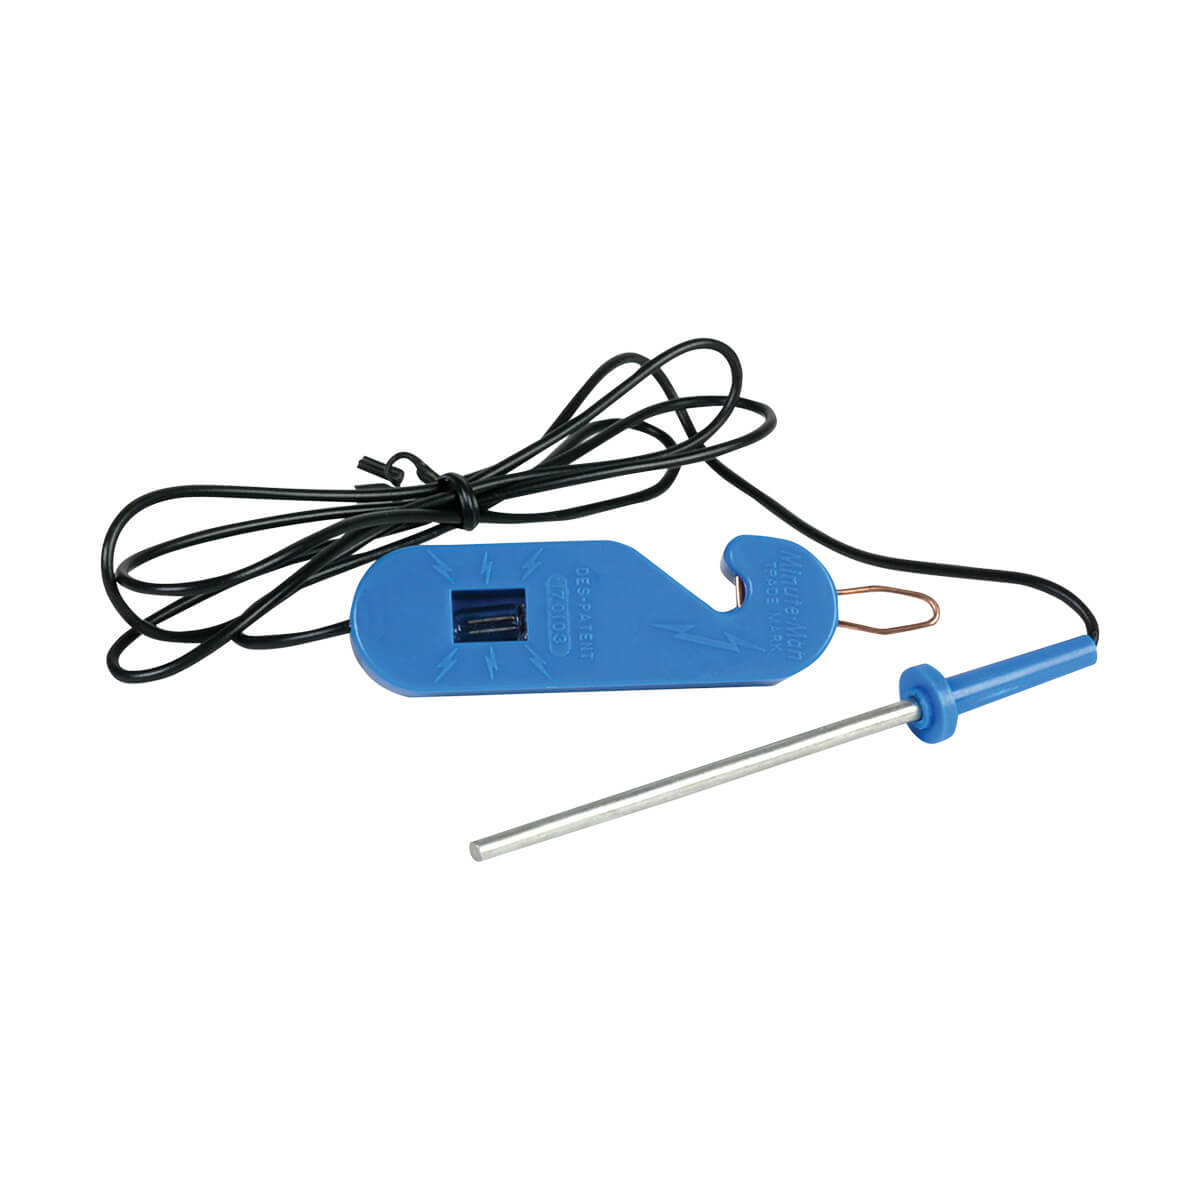 Power Wizard T-9 One Light Electric Fence Tester